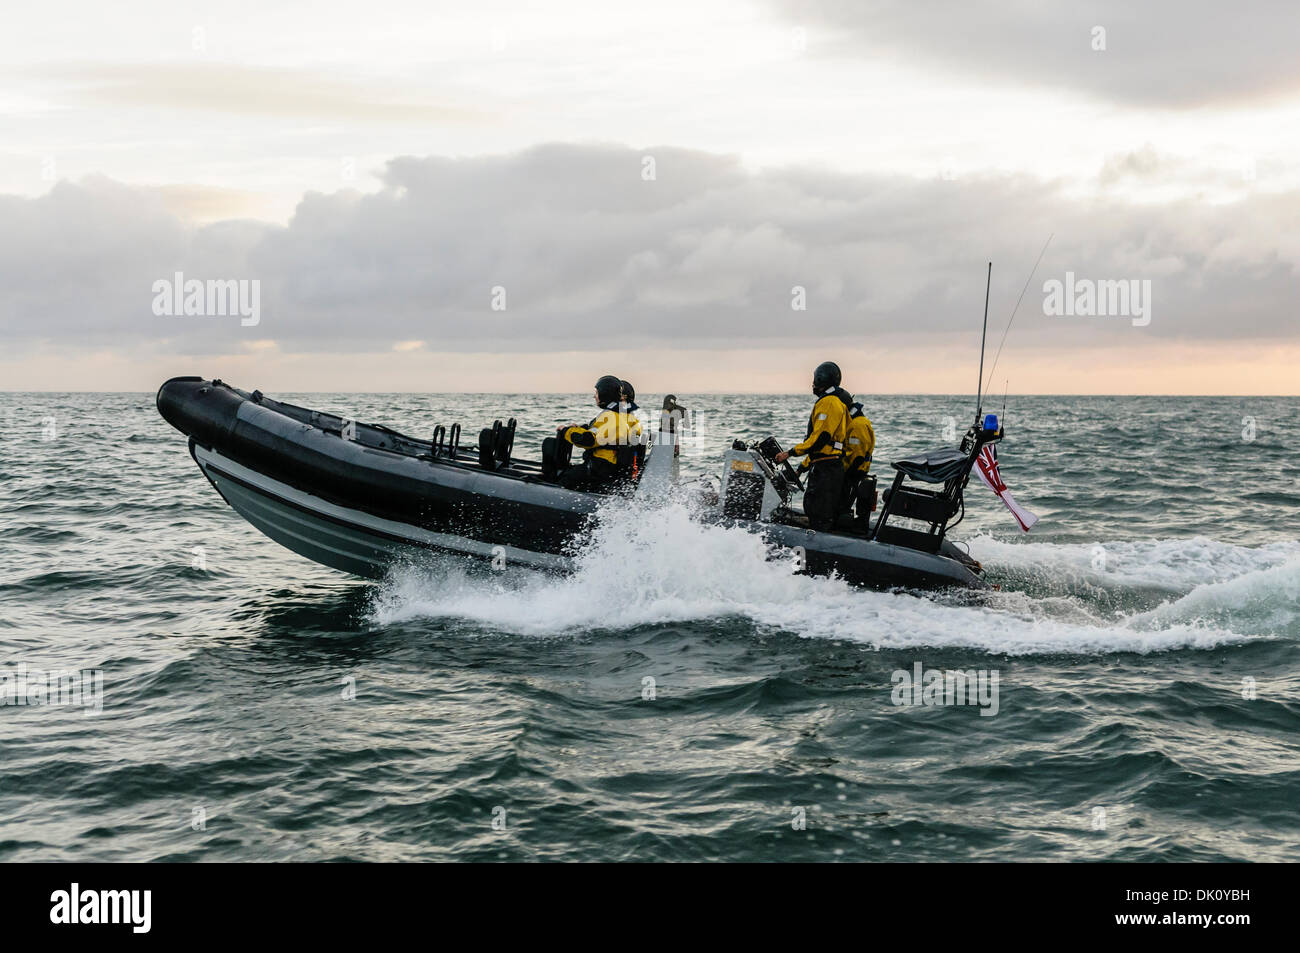 Belfast, Northern Ireland. 30th Nov 2013 - A Royal Navy VT Halmatic Pacific 22 pursuit RIB splashes over waves at speed with four passengers on board wearing dry-suits. Credit:  Stephen Barnes/Alamy Live News Stock Photo